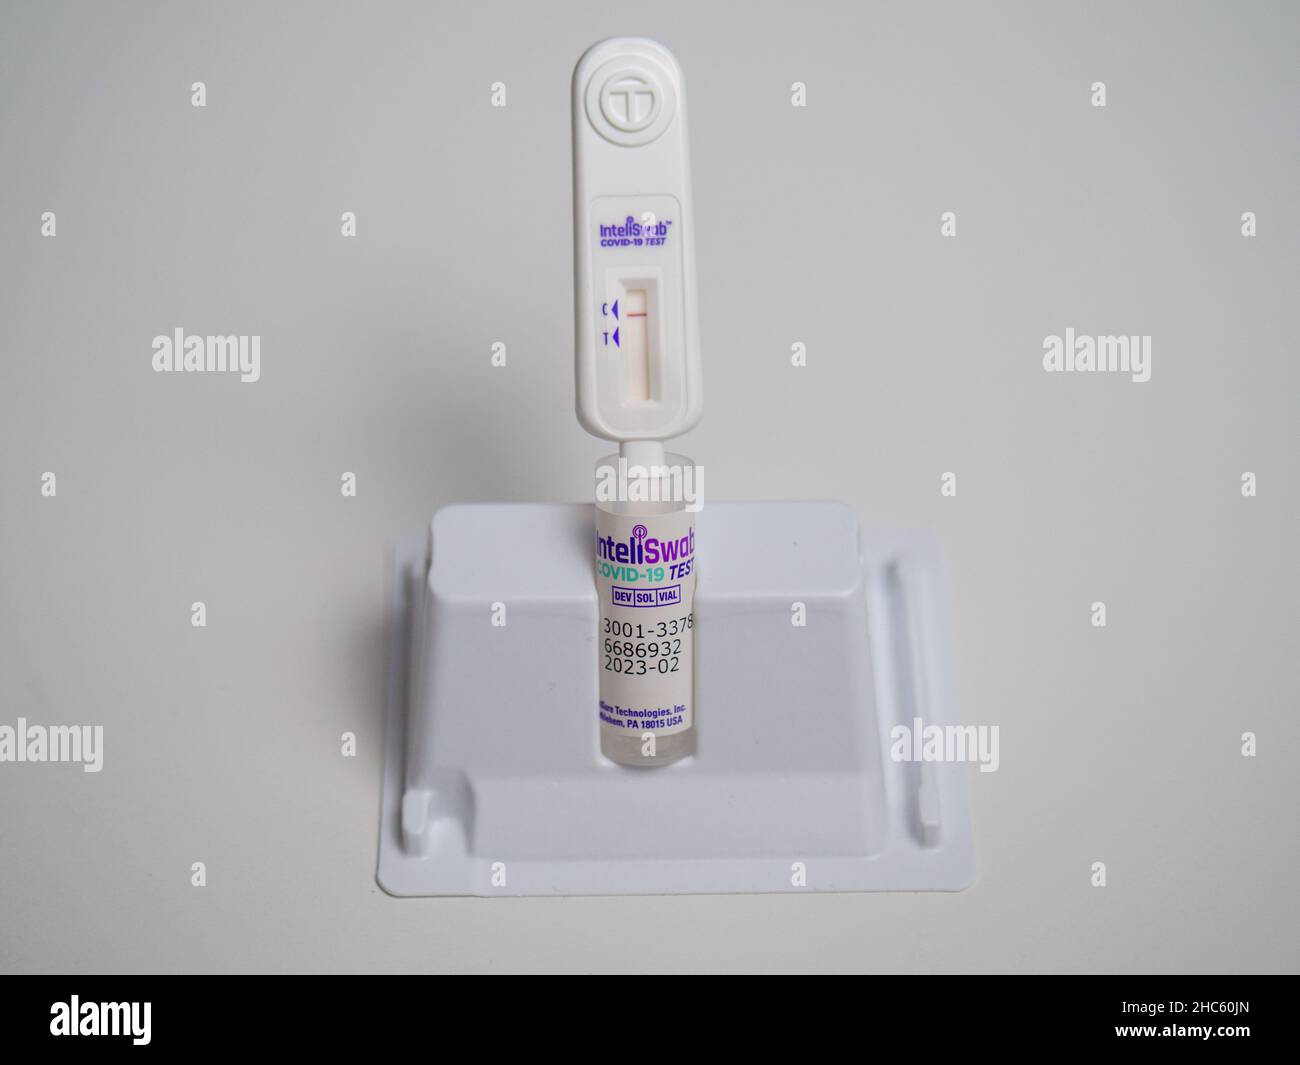 COVID-19 home antigen test kit. Test shows negative result, control area reacted, test area did not. Stock Photo